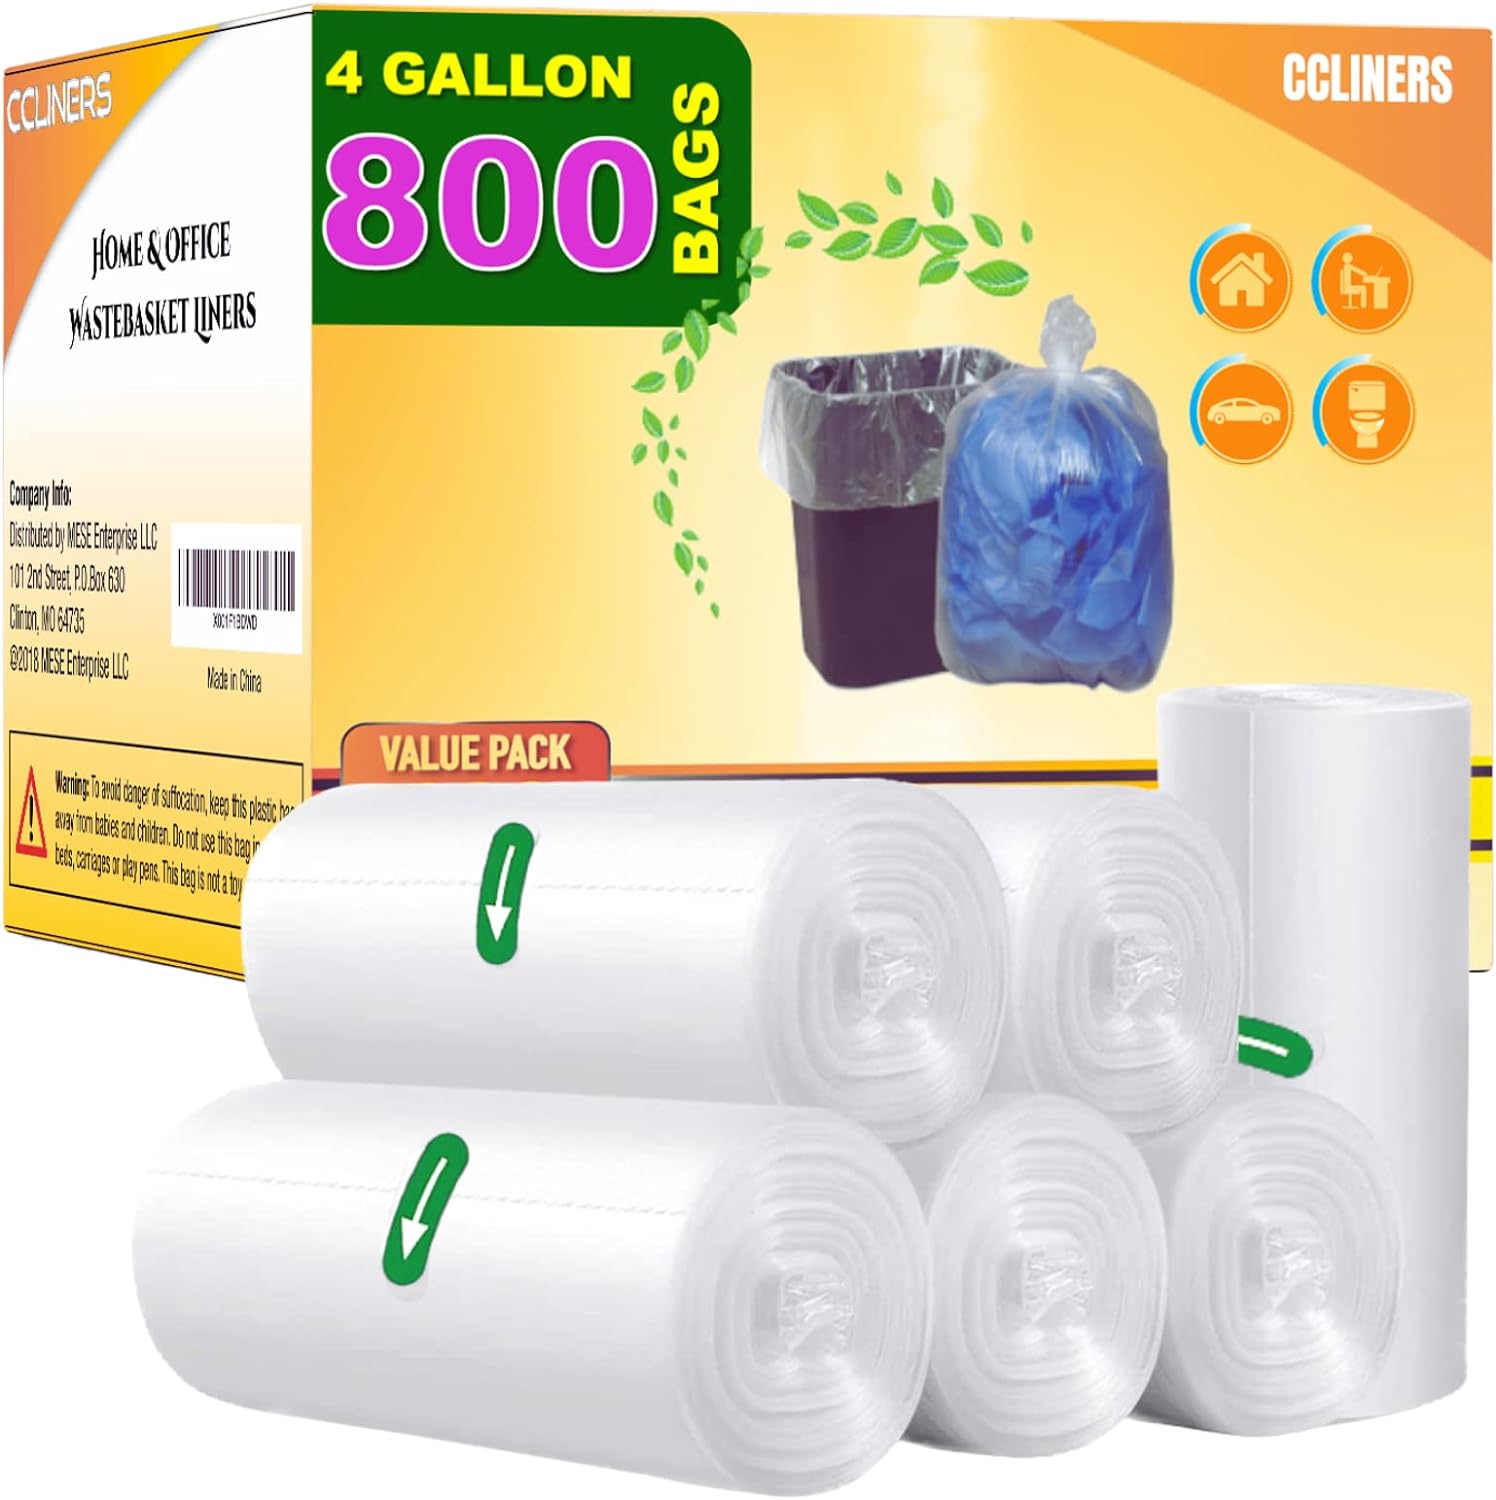 2-4 Gallon Small Trash Bags Bathroom Garbage Bags Value Pack 440